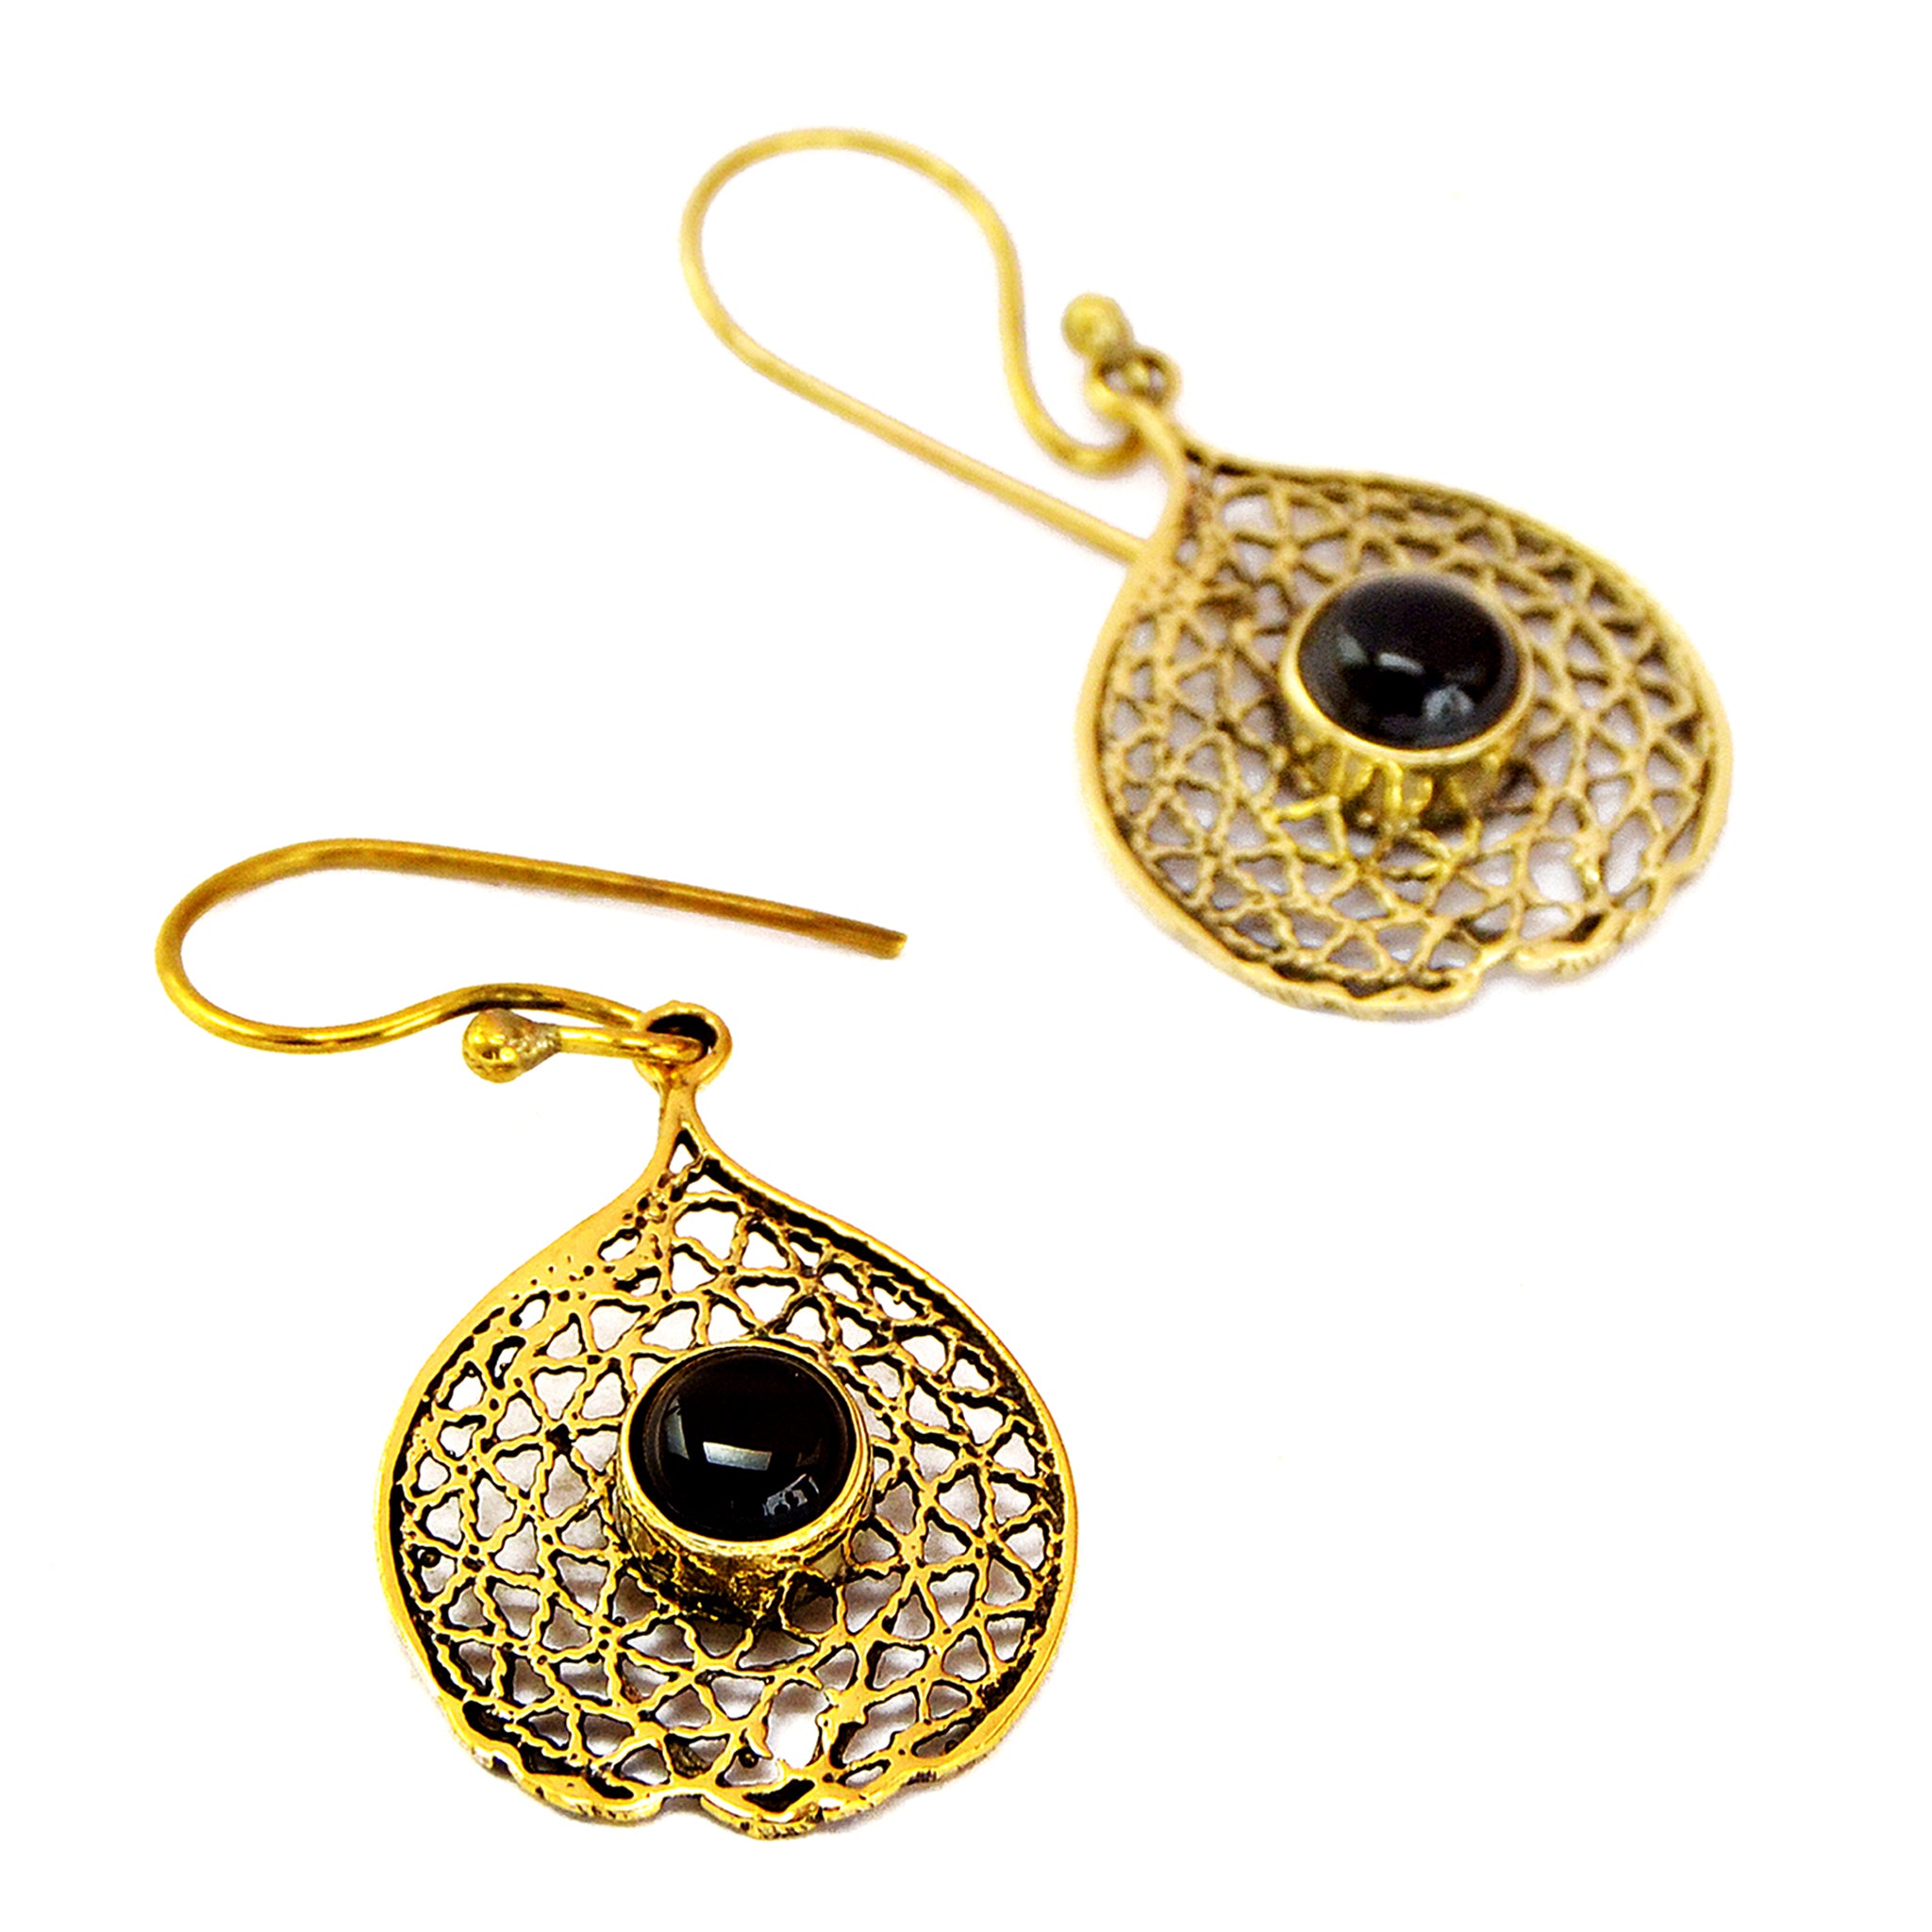 Indian earrings with stone